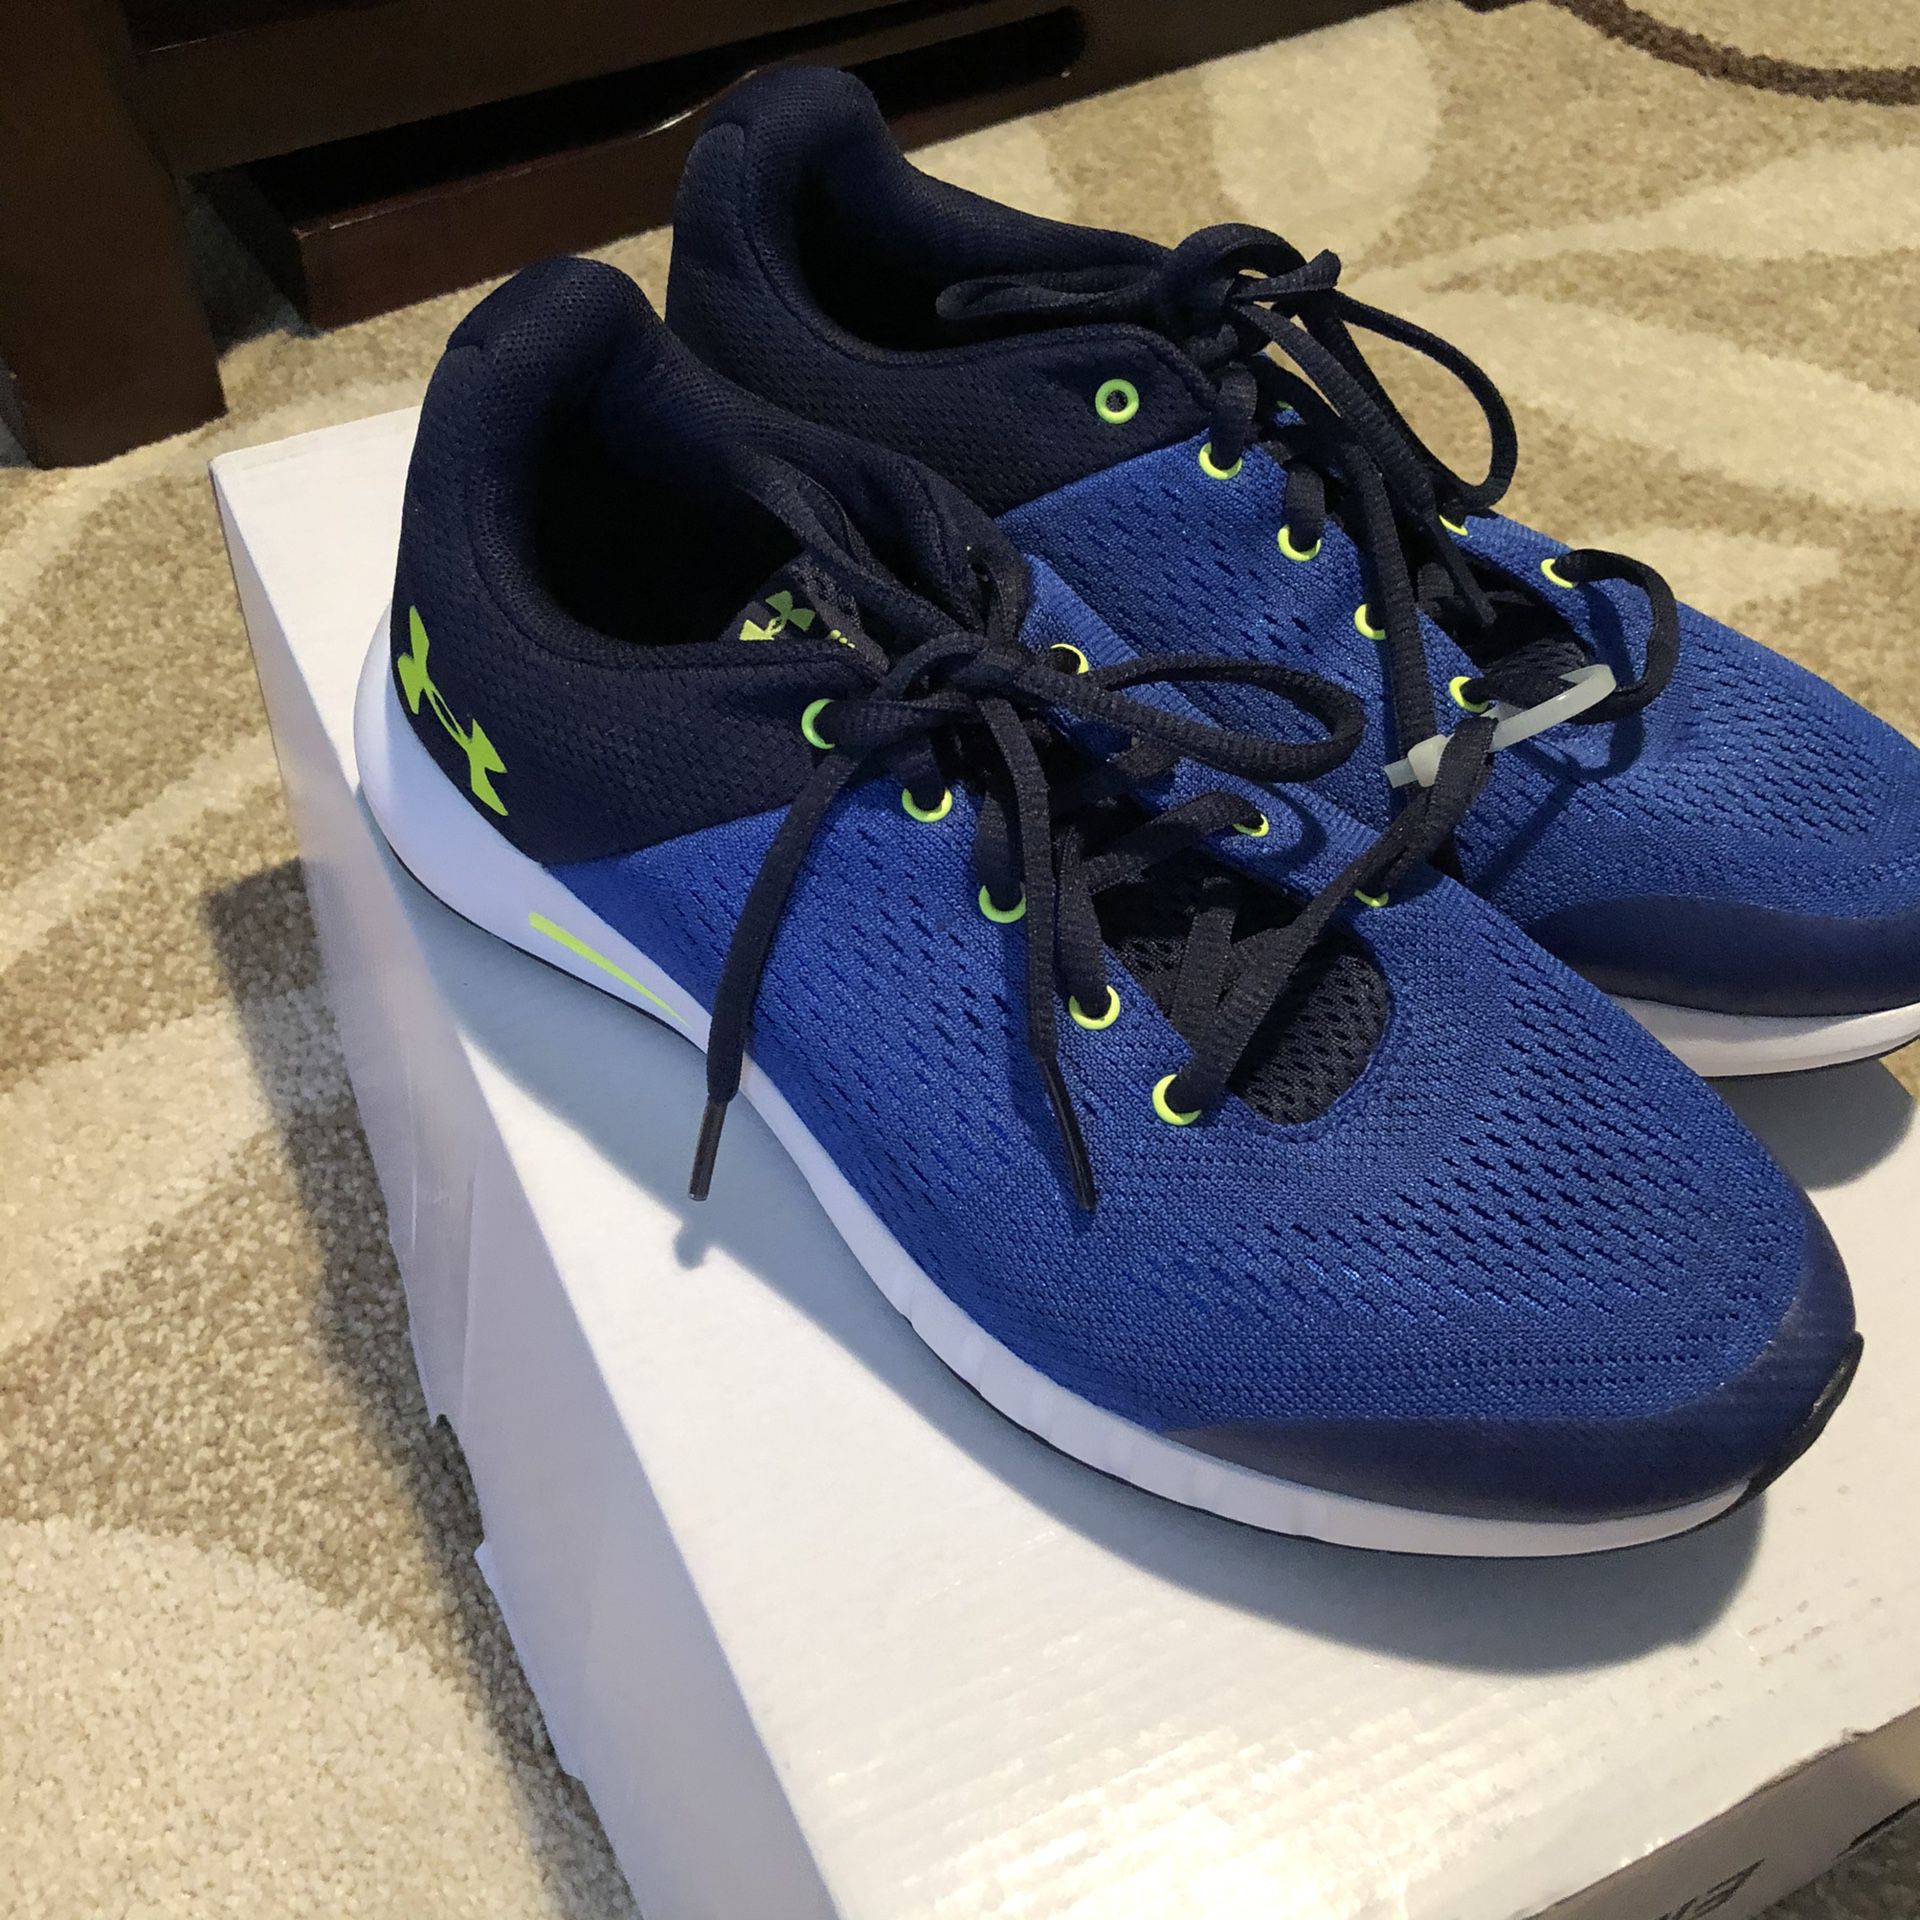 New Under Armour boy’s sneakers size 6Y